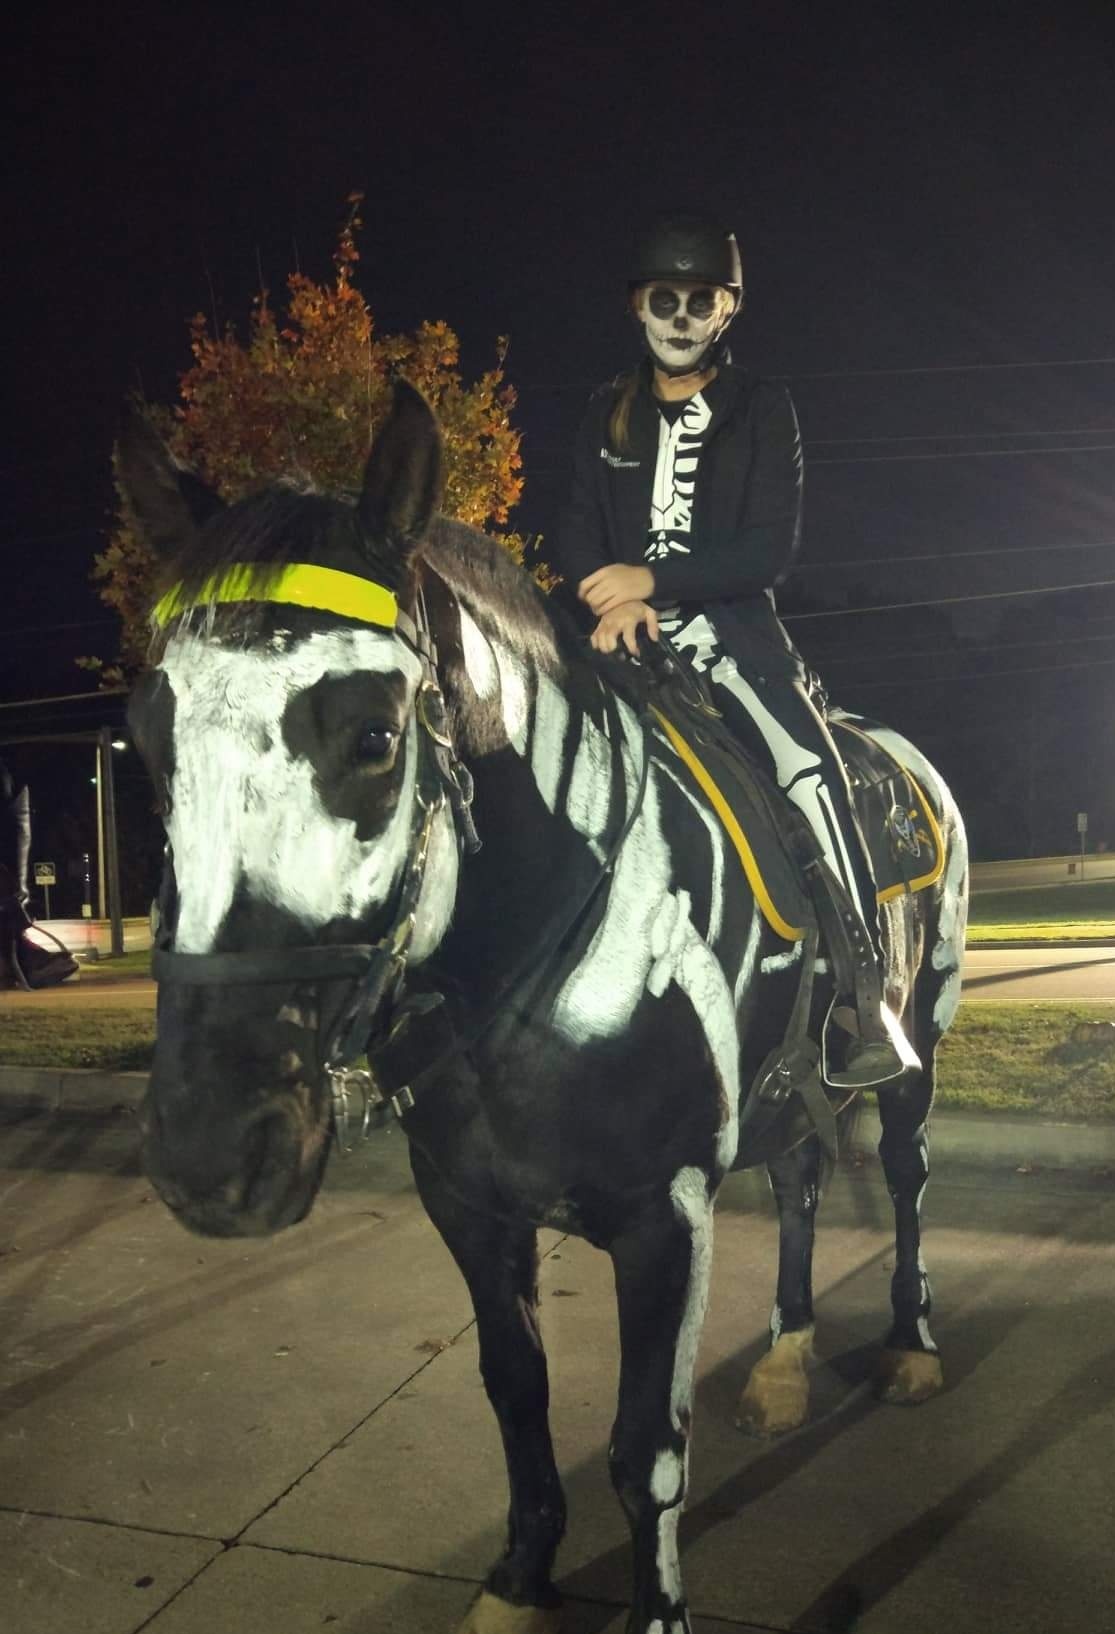 Police horses and riders painted as skeletons.